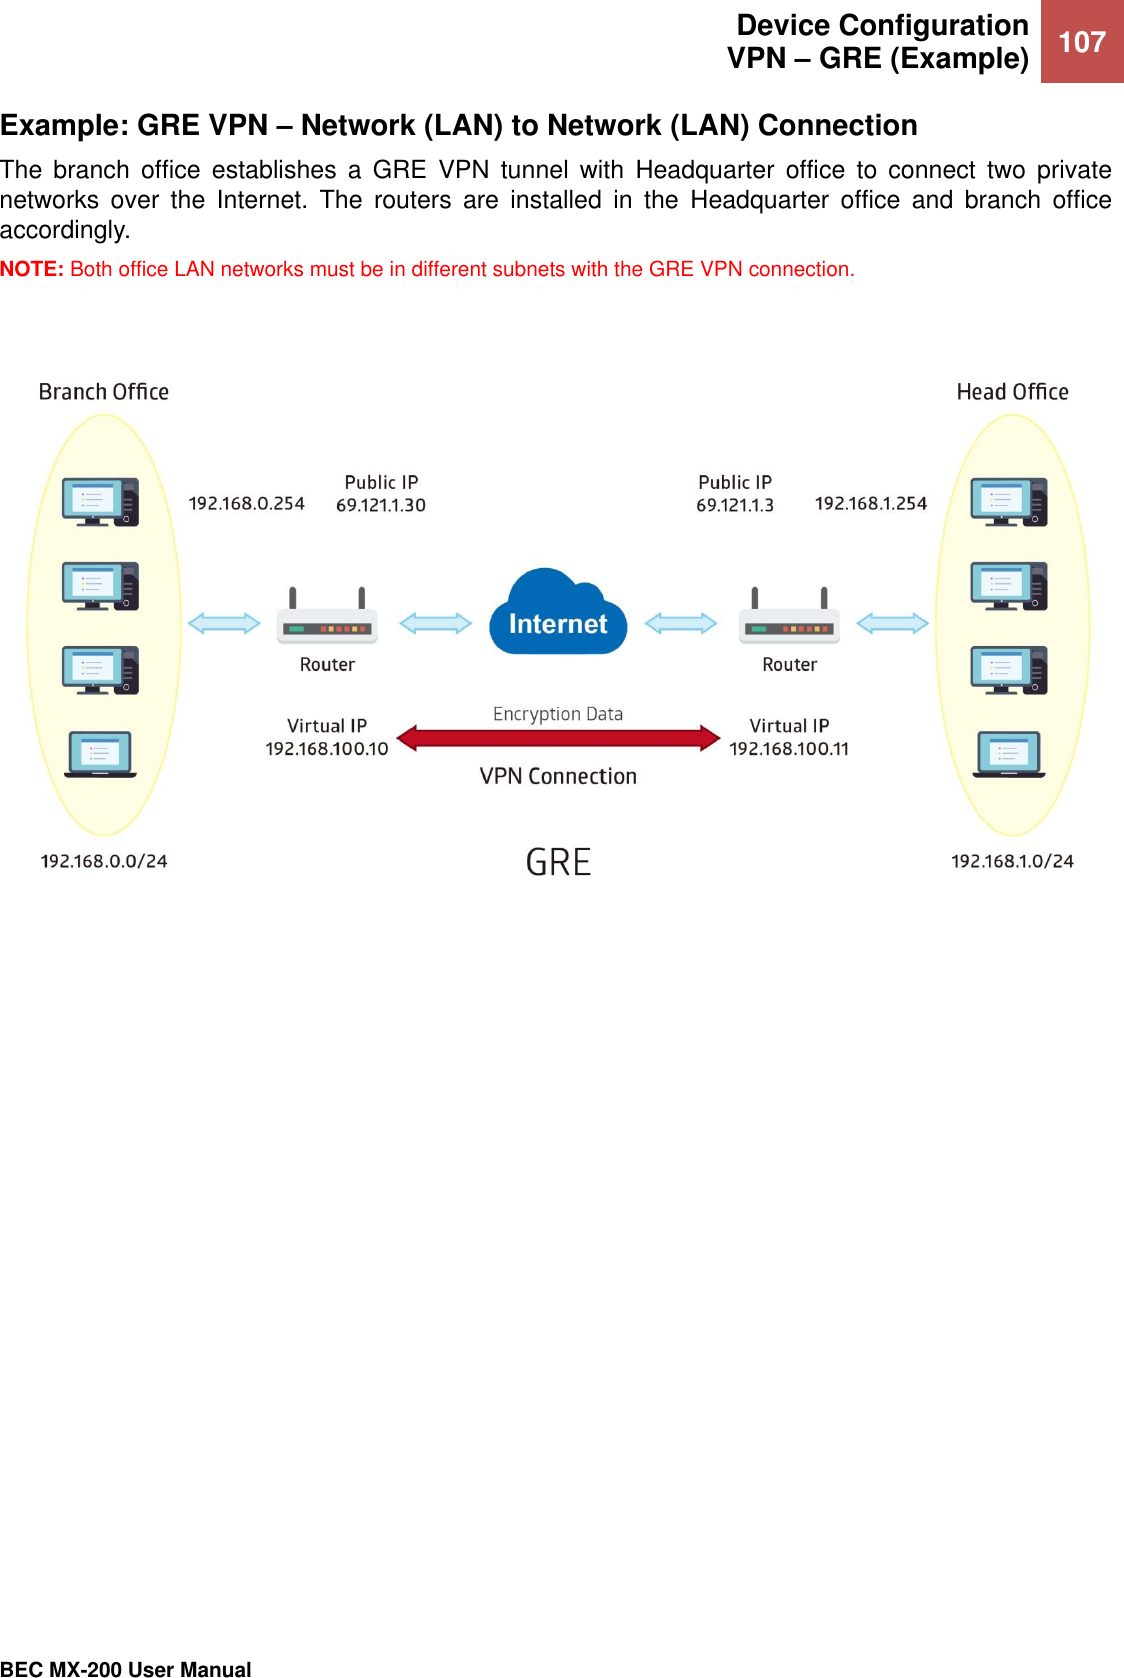  Device Configuration VPN – GRE (Example) 107   BEC MX-200 User Manual  Example: GRE VPN – Network (LAN) to Network (LAN) Connection The  branch  office  establishes  a GRE  VPN  tunnel  with  Headquarter  office  to  connect  two  private networks  over  the  Internet.  The  routers  are  installed  in  the  Headquarter  office  and  branch  office accordingly. NOTE: Both office LAN networks must be in different subnets with the GRE VPN connection.     